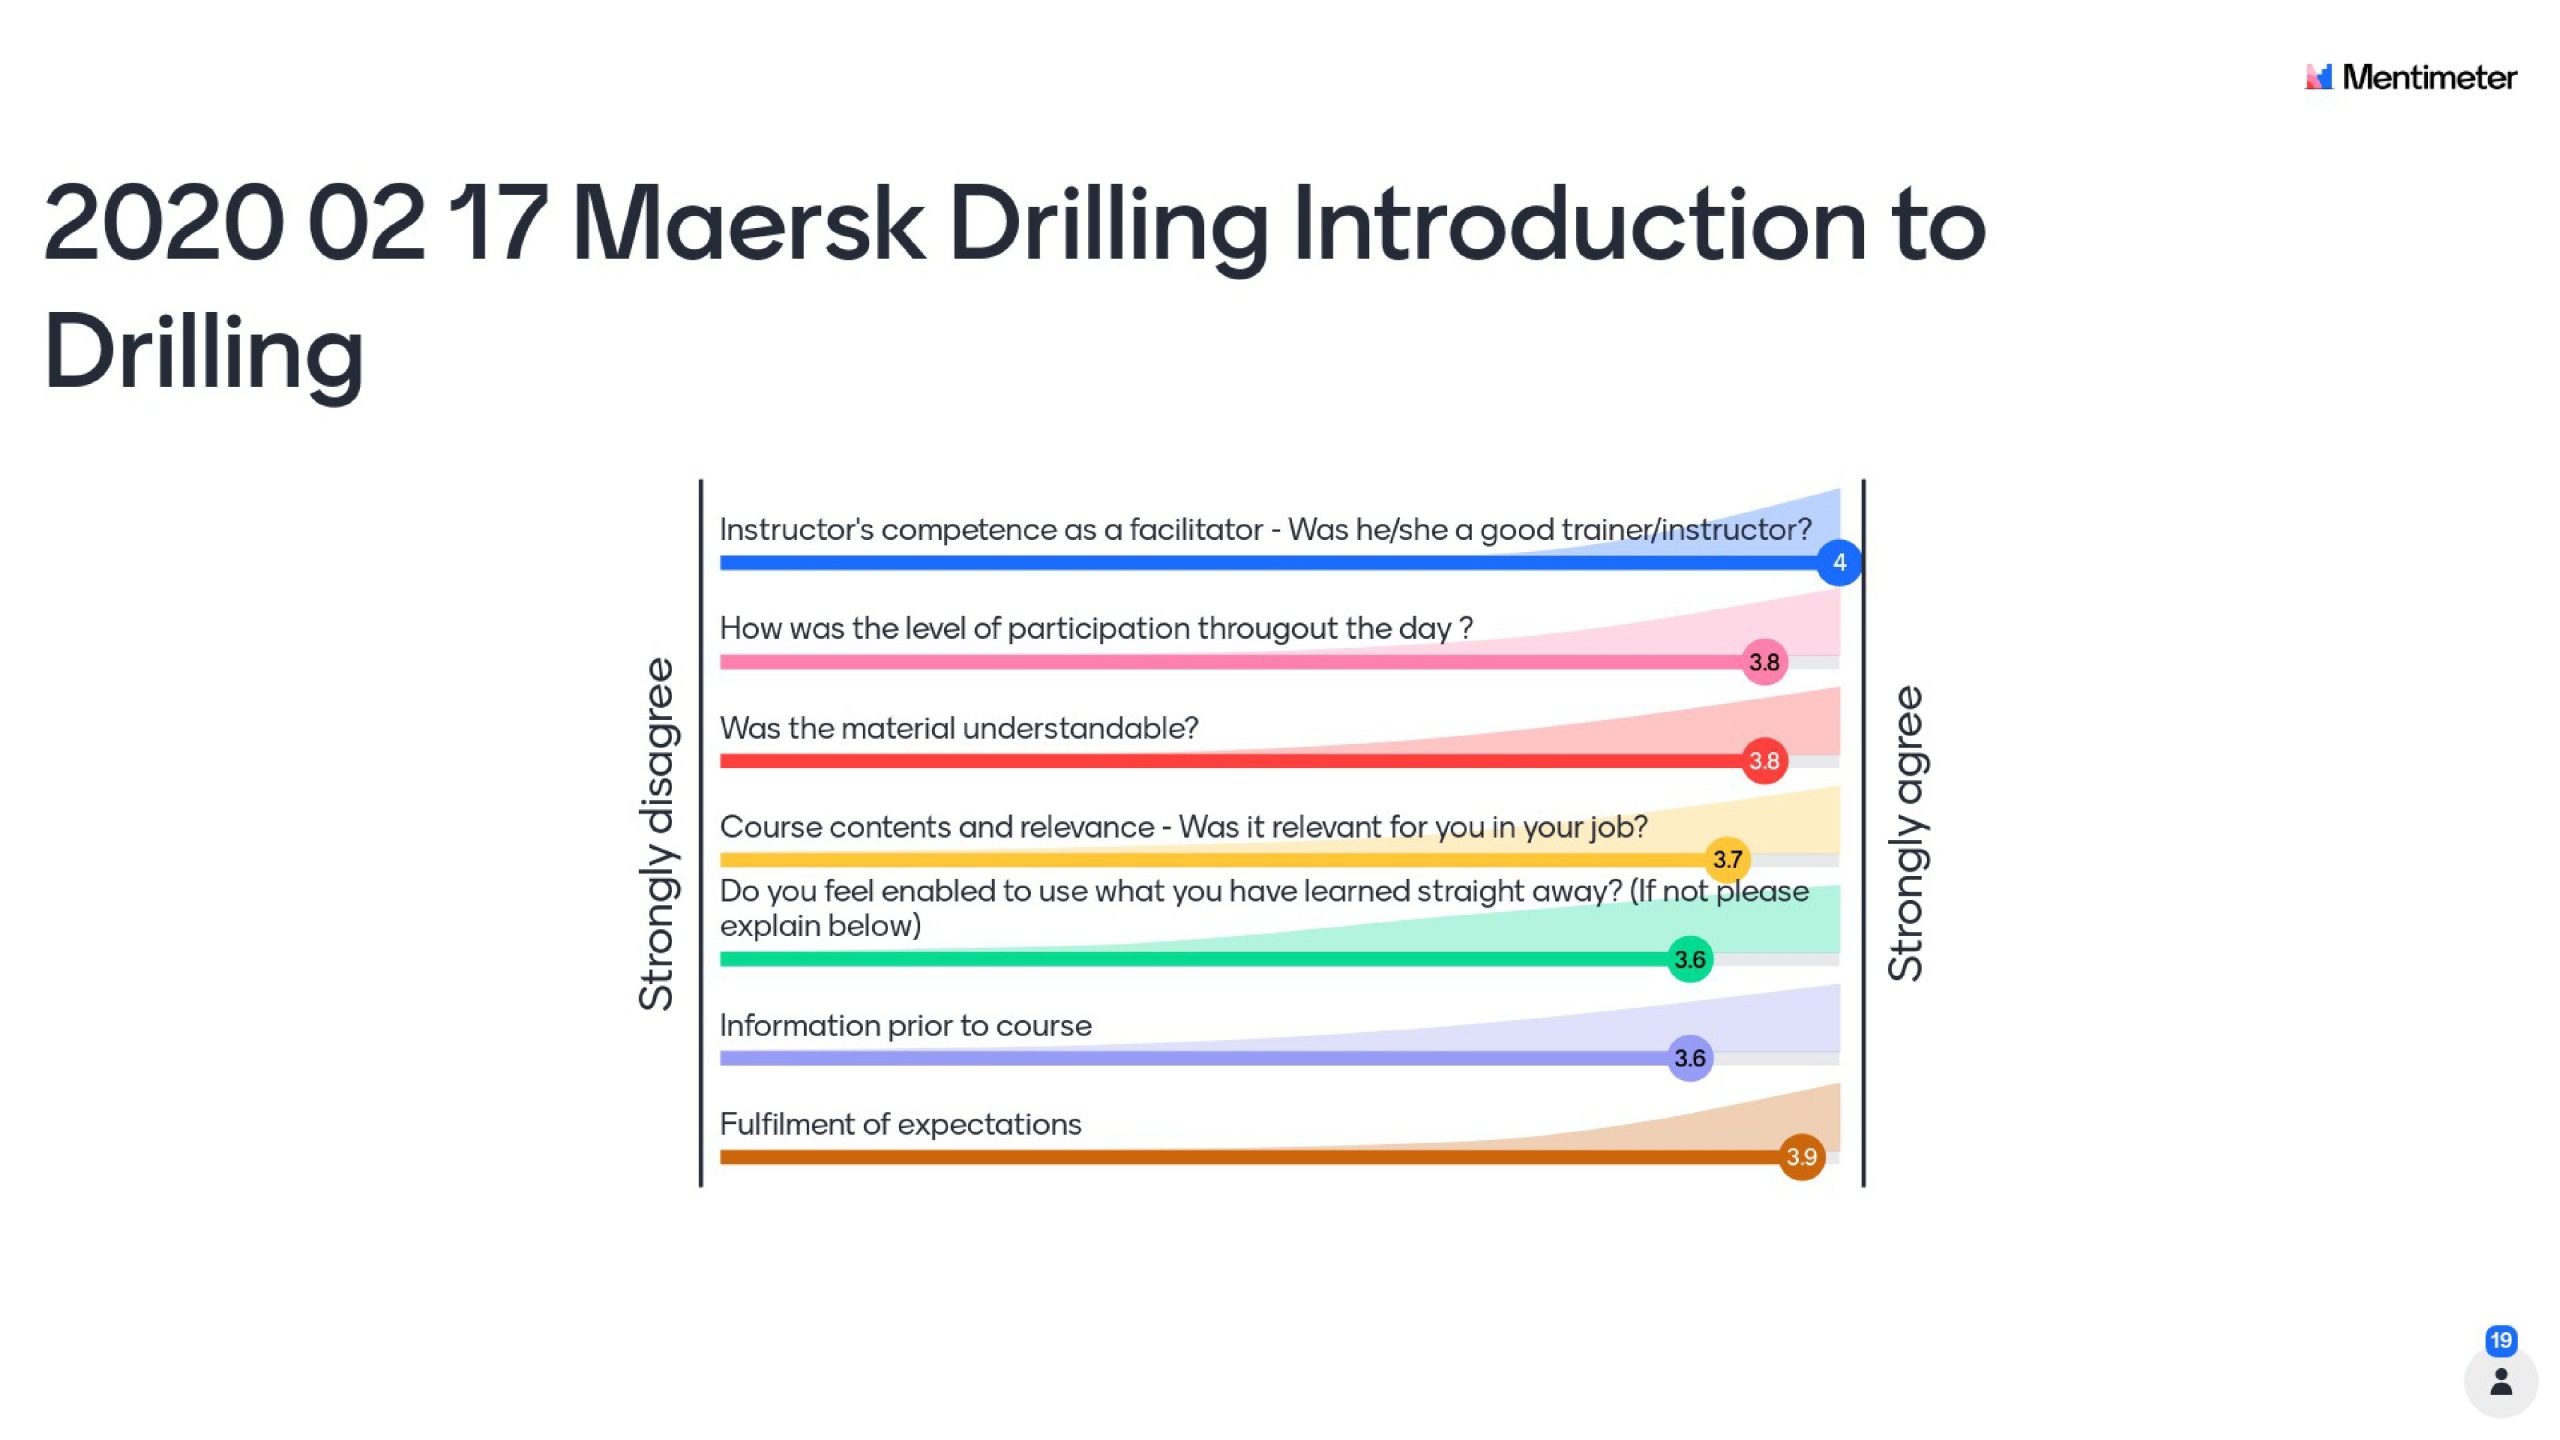 2020 02 17 Maersk Drilling Introduction to Drilling